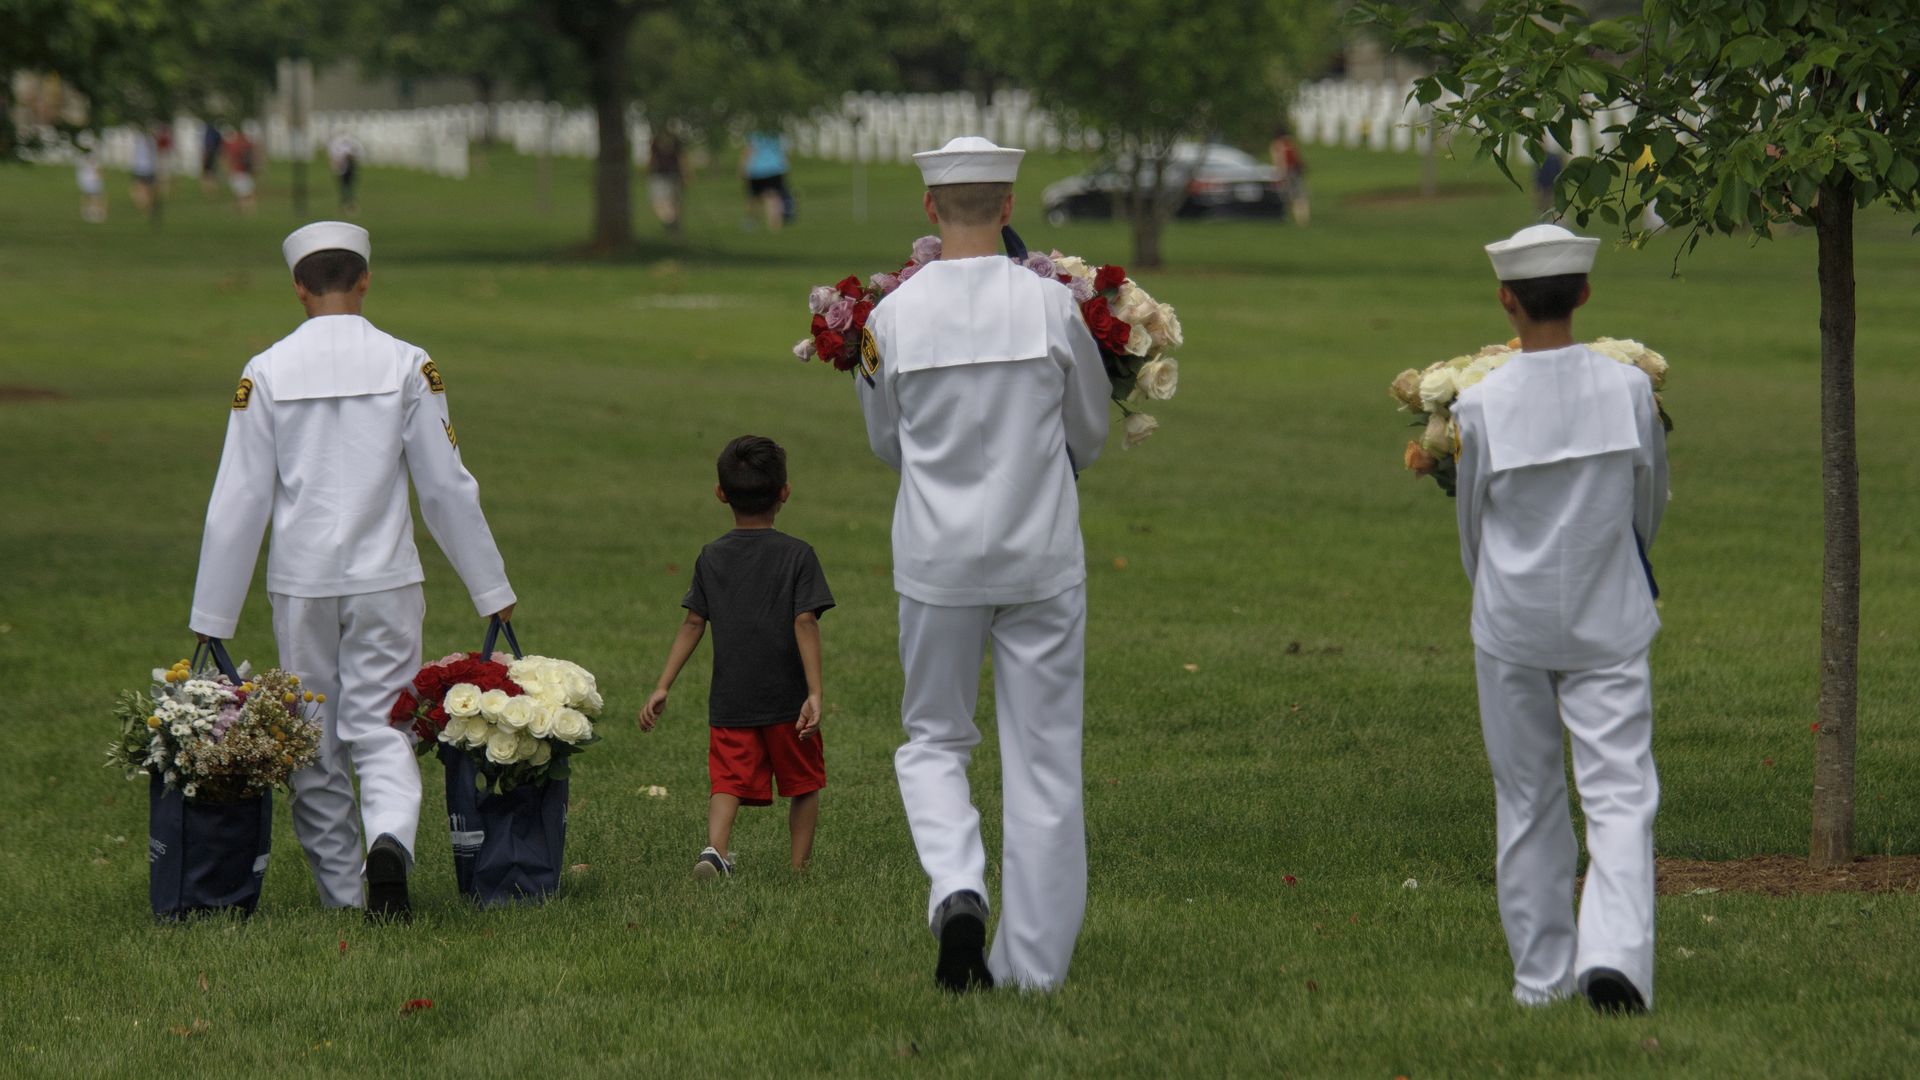 United States Naval Sea Cadets carry flowers to Cemetery Section 33, during a volunteer event ahead of Memorial Day at Arlington National Cemetery